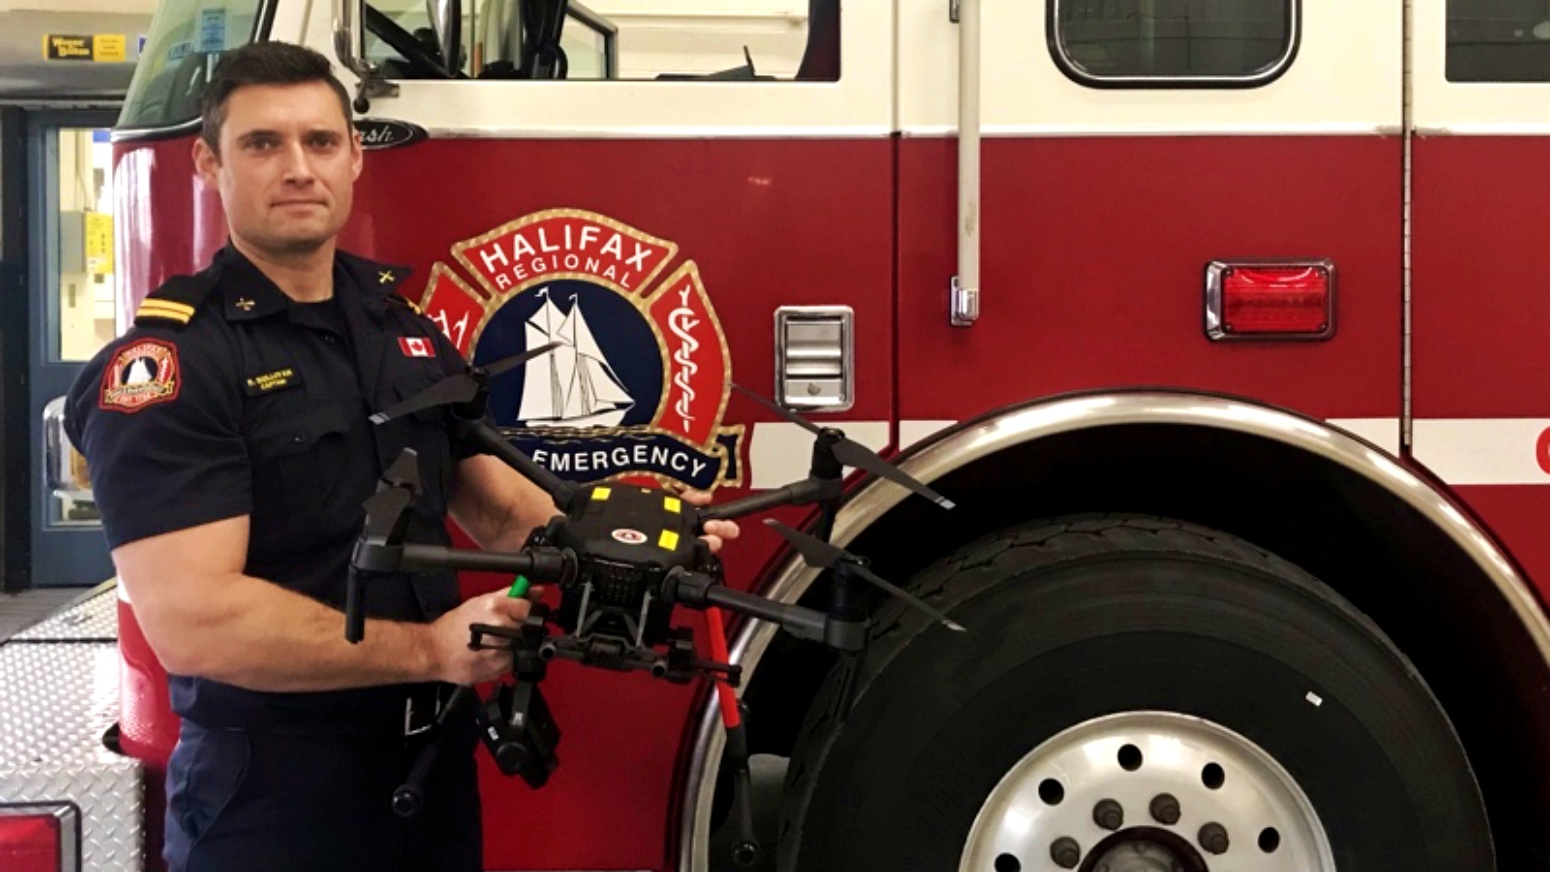 Drones are more than just a toy for Halifax firefighters